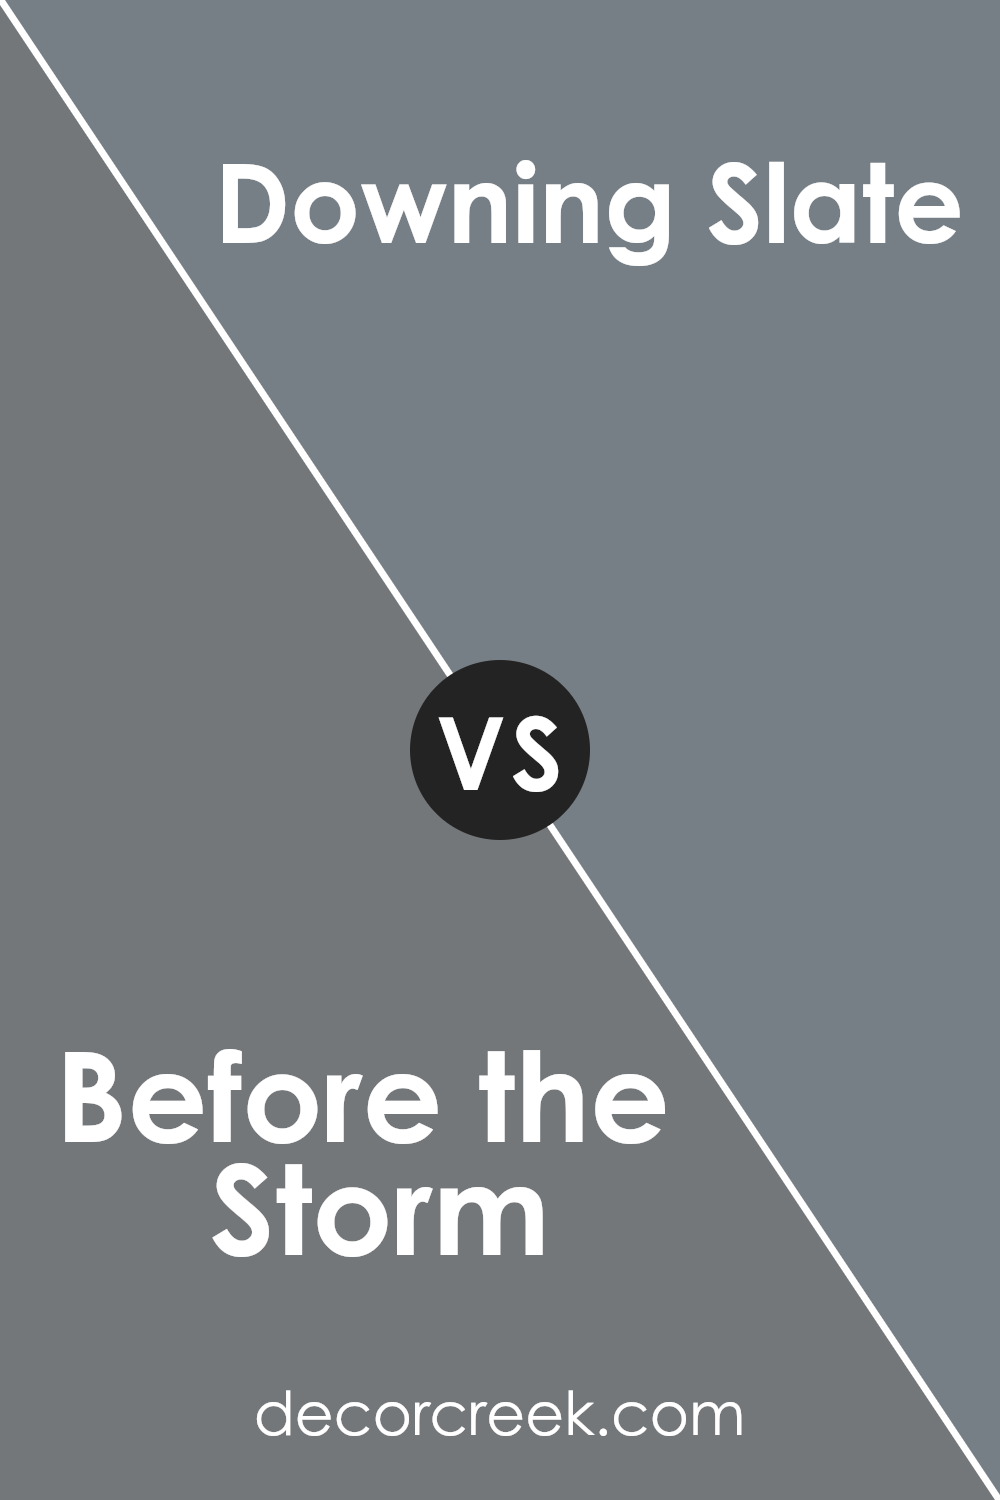 before_the_storm_sw_9564_vs_downing_slate_sw_2819